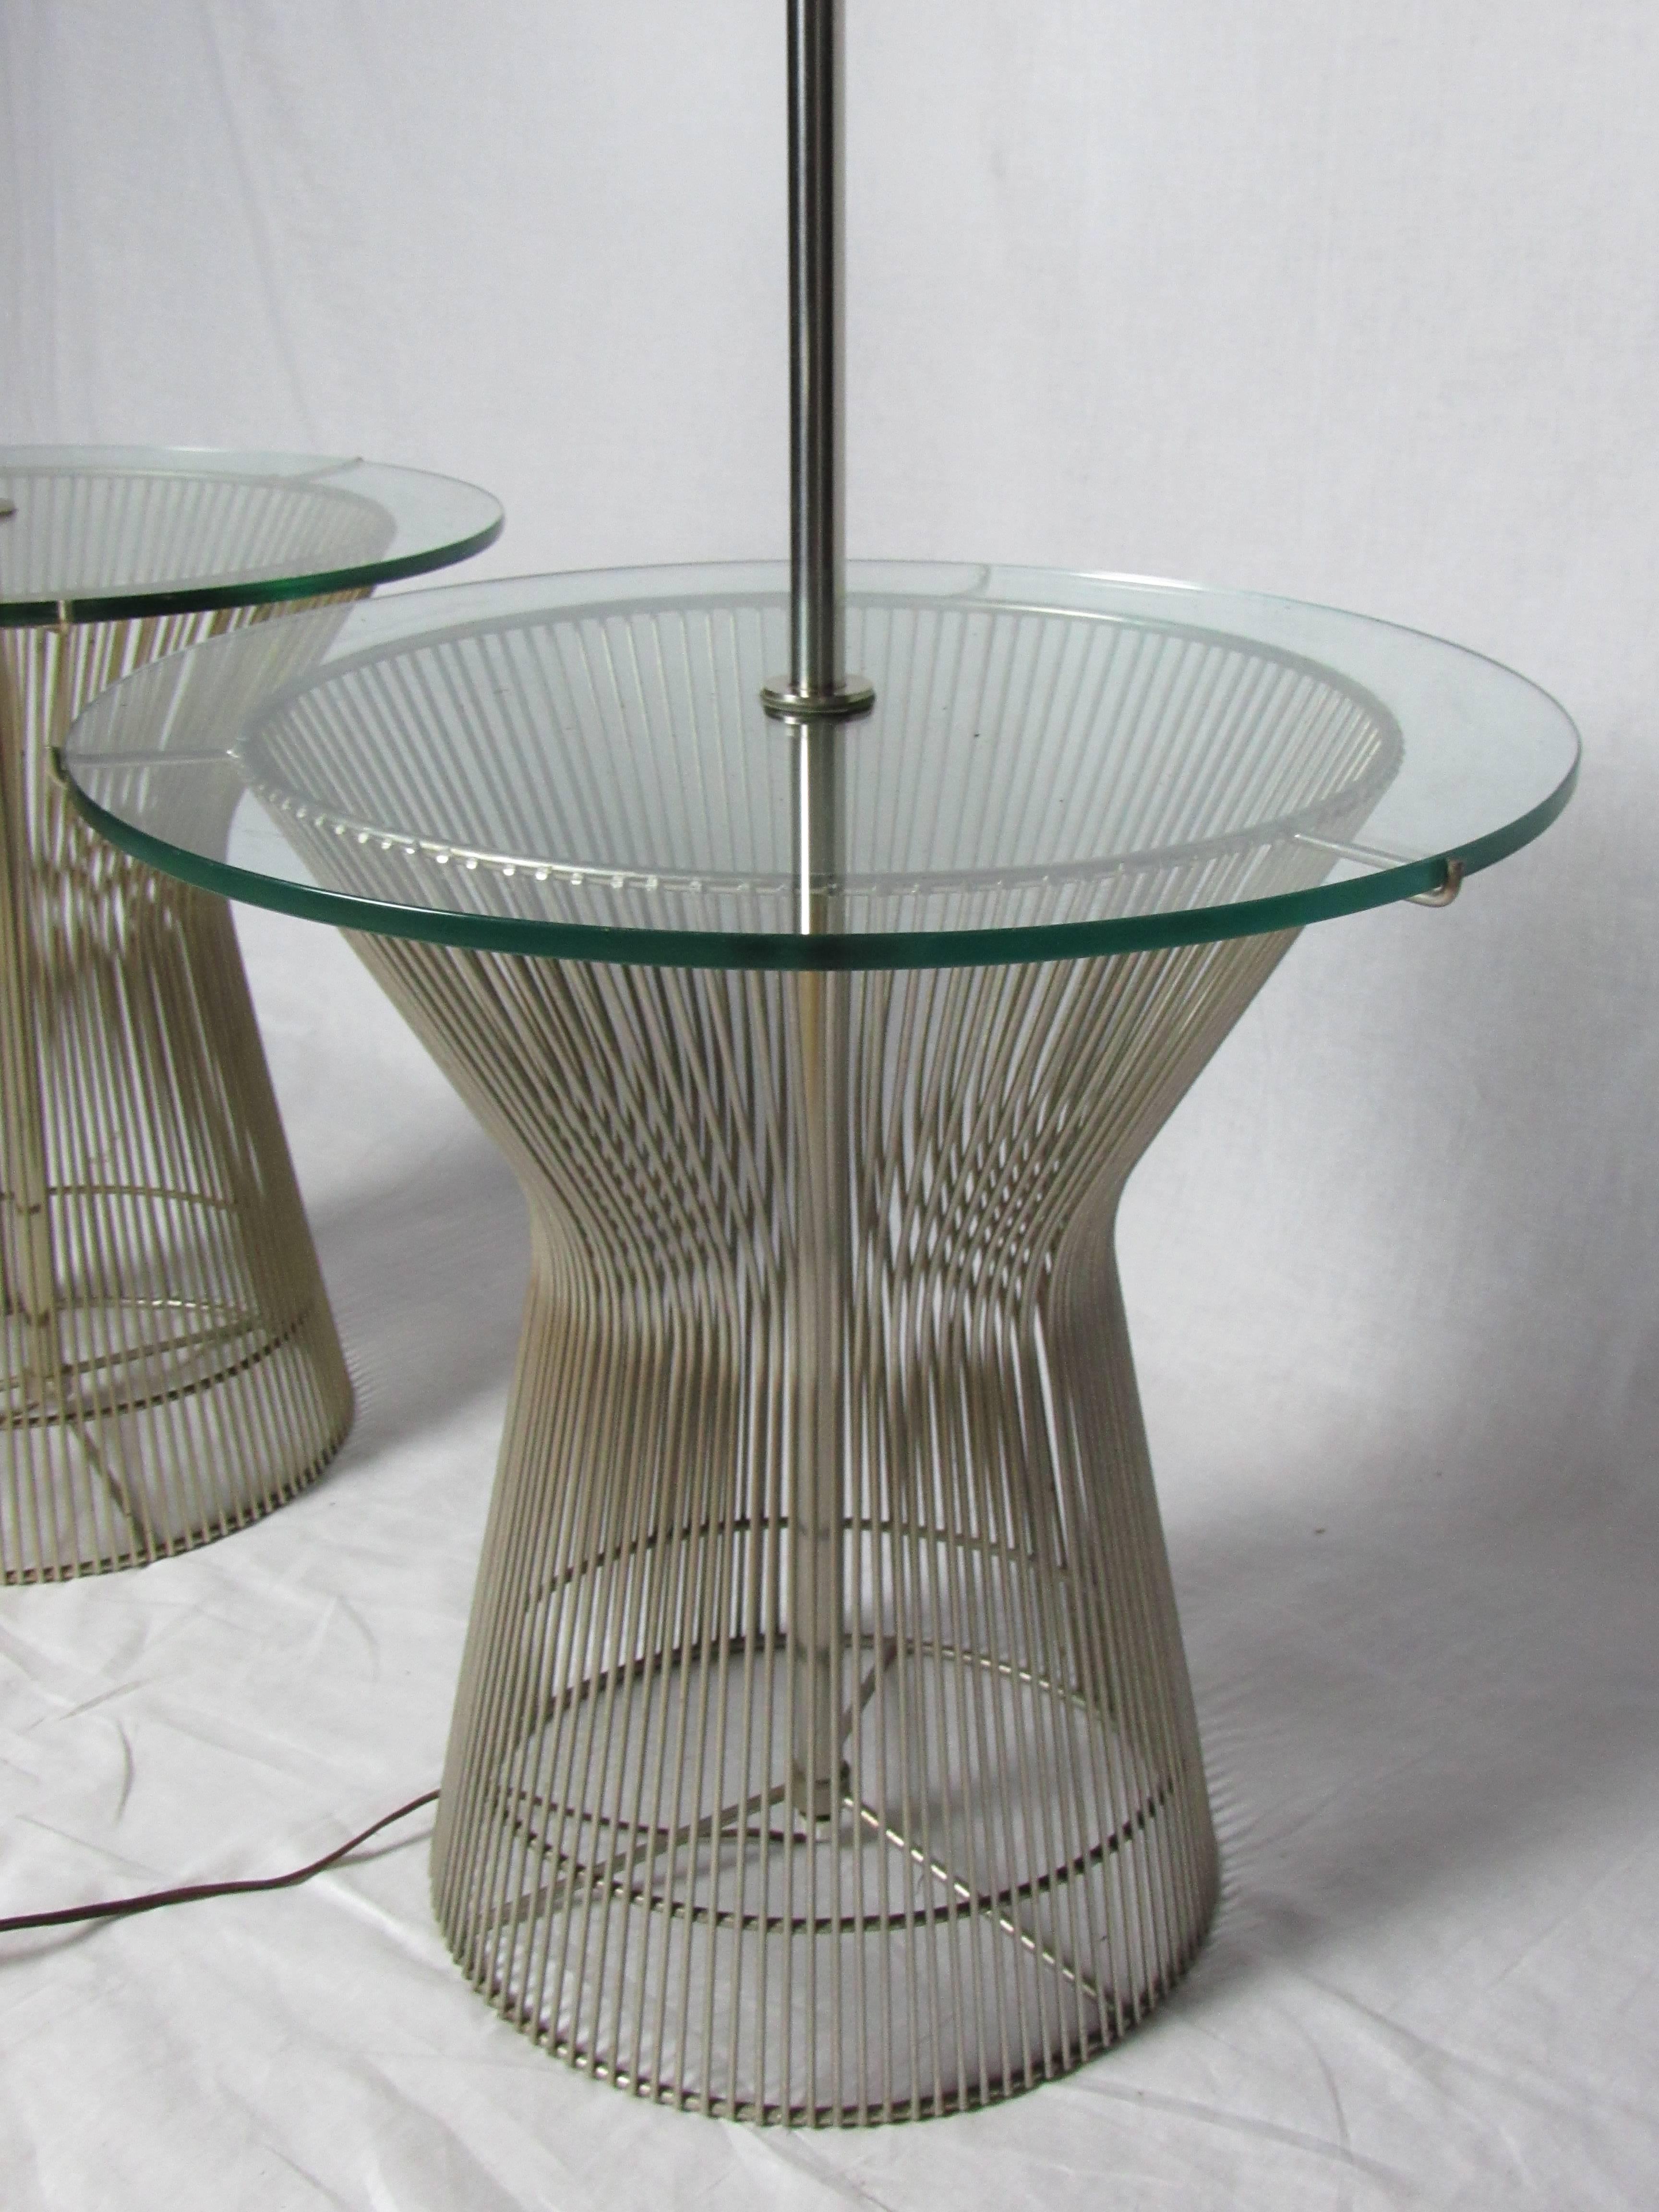 Mid-Century Modern Pair of Chrome and Glass Lamp Tables by Laurel Warren Platner Style, circa 1960